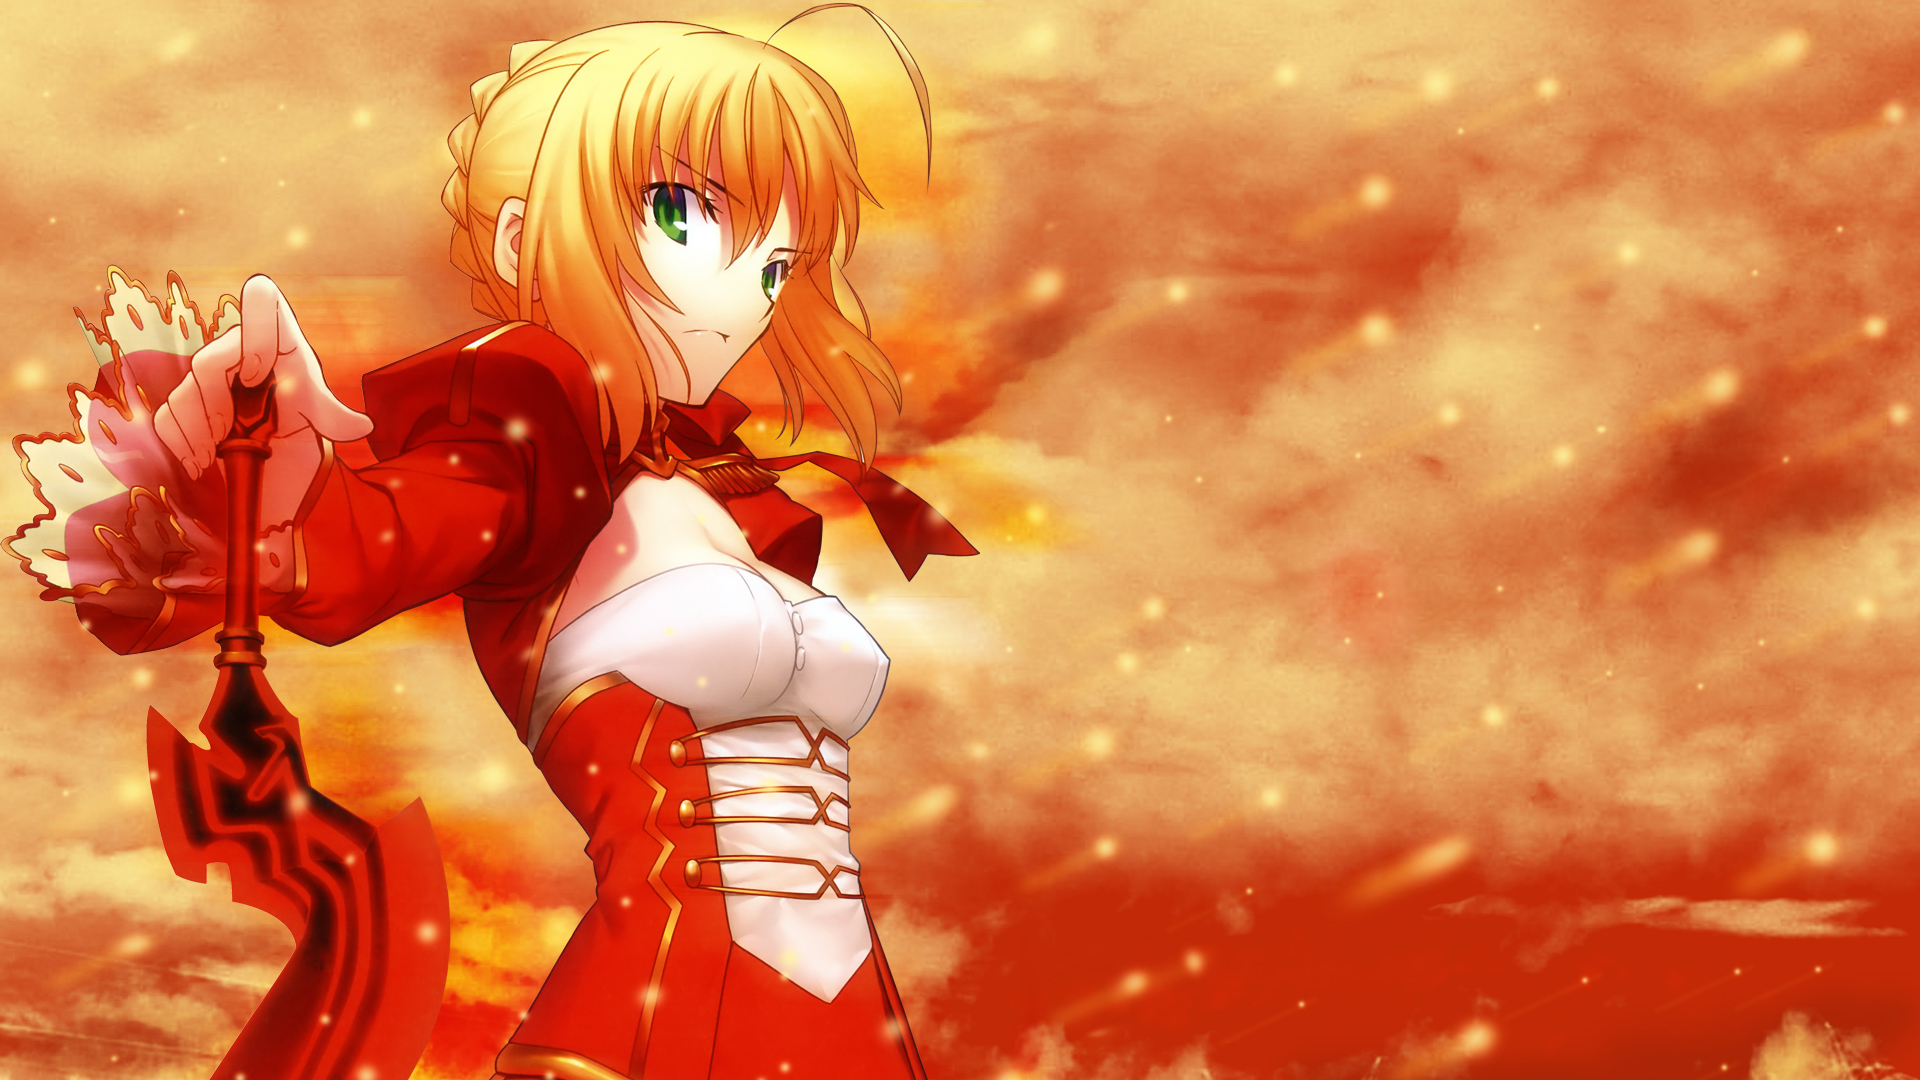 blondes, Fate/Stay Night, green eyes, Saber, Fate/EXTRA, Saber Extra, Fate series - desktop wallpaper